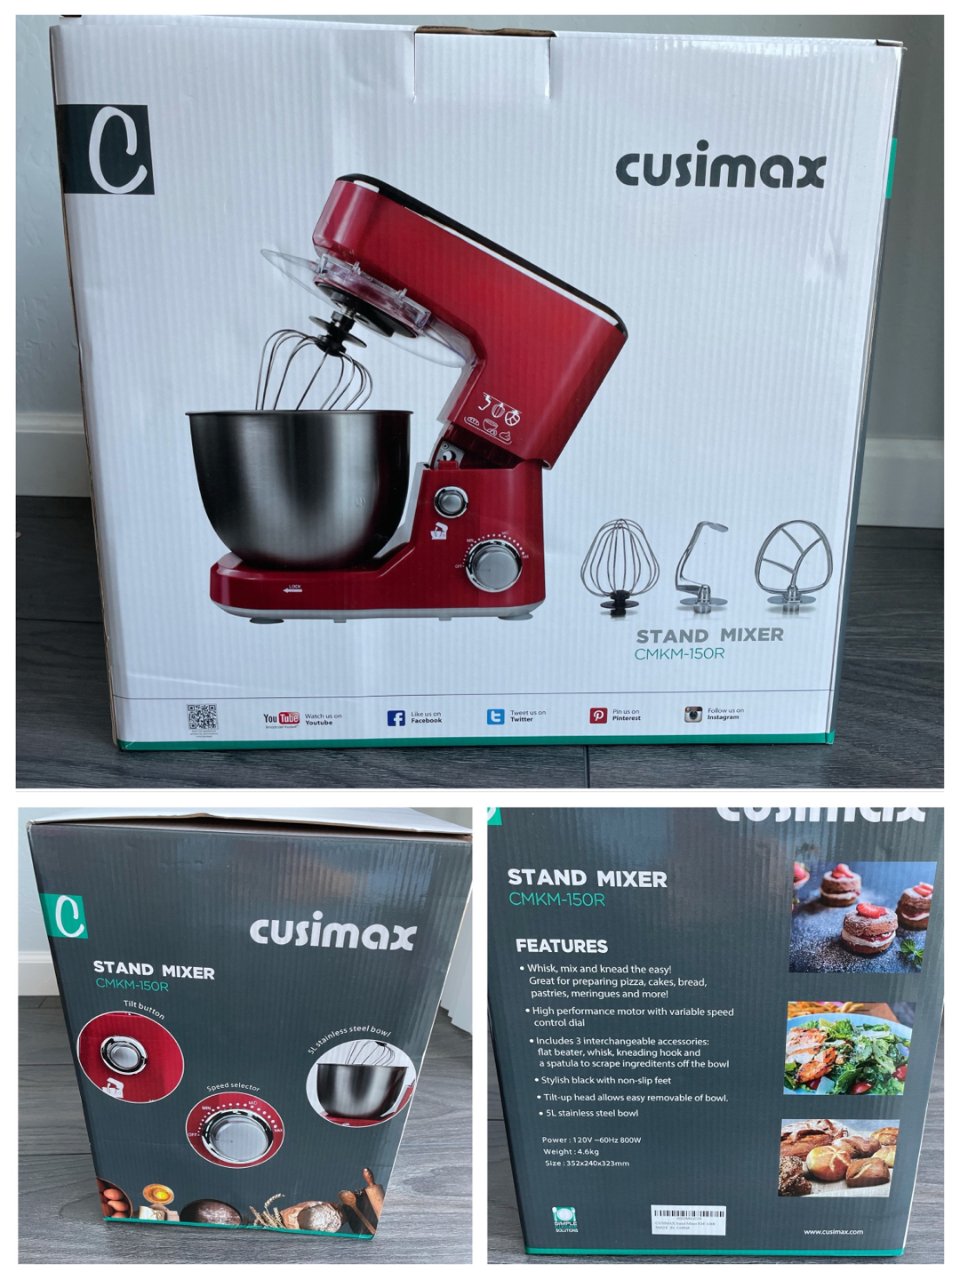 Stand Mixer, Cusimax Dough Mixer Tilt-Head Electric Mixer with 5-Quart Stainless Steel Bowl, Dough Hook, Mixing Beater and Whisk, Splash Guard, Red Food Mixer: Kitchen & Dining